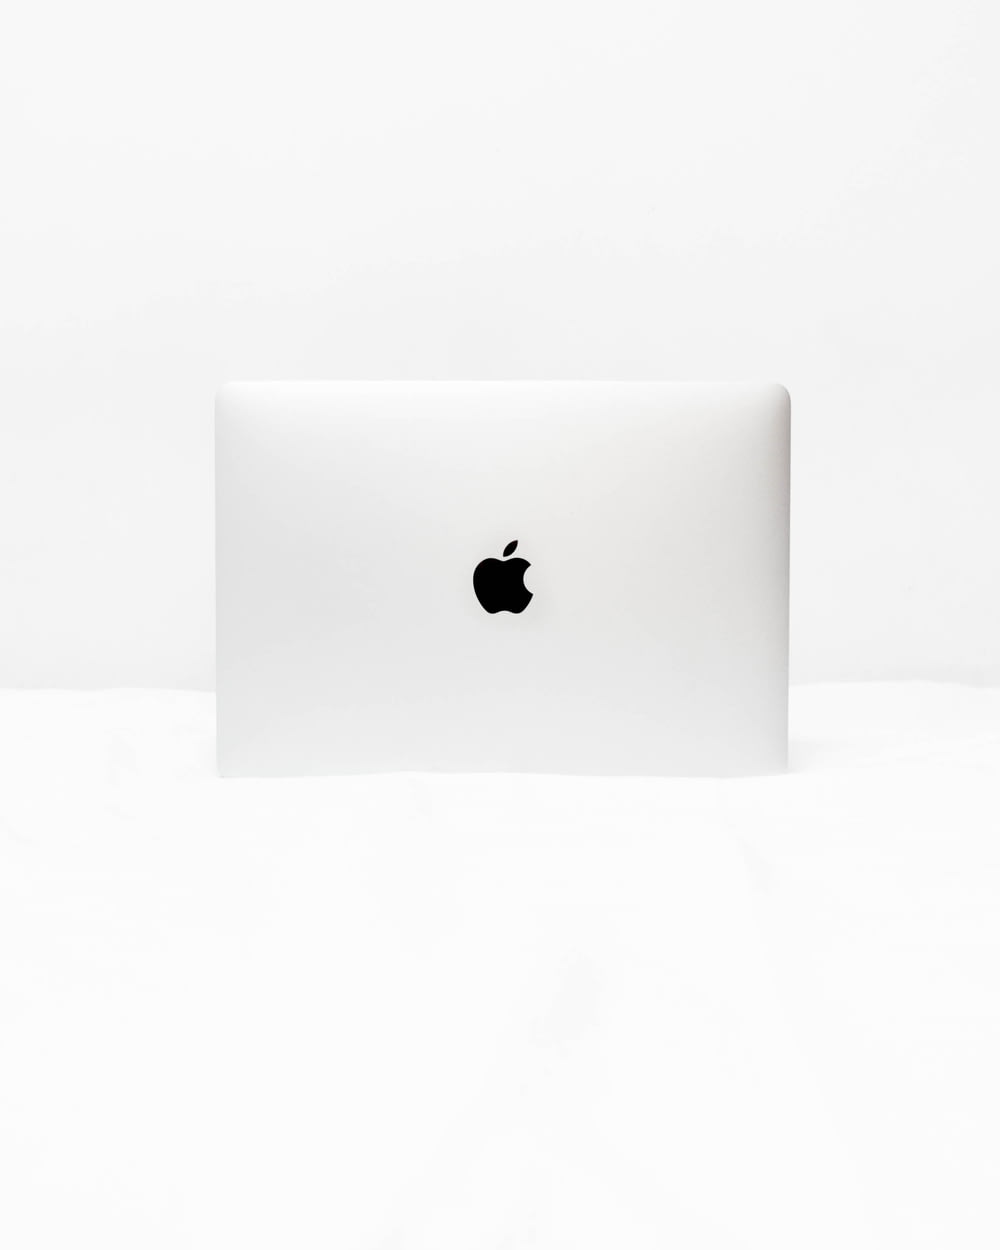 MacBook White open on white surface